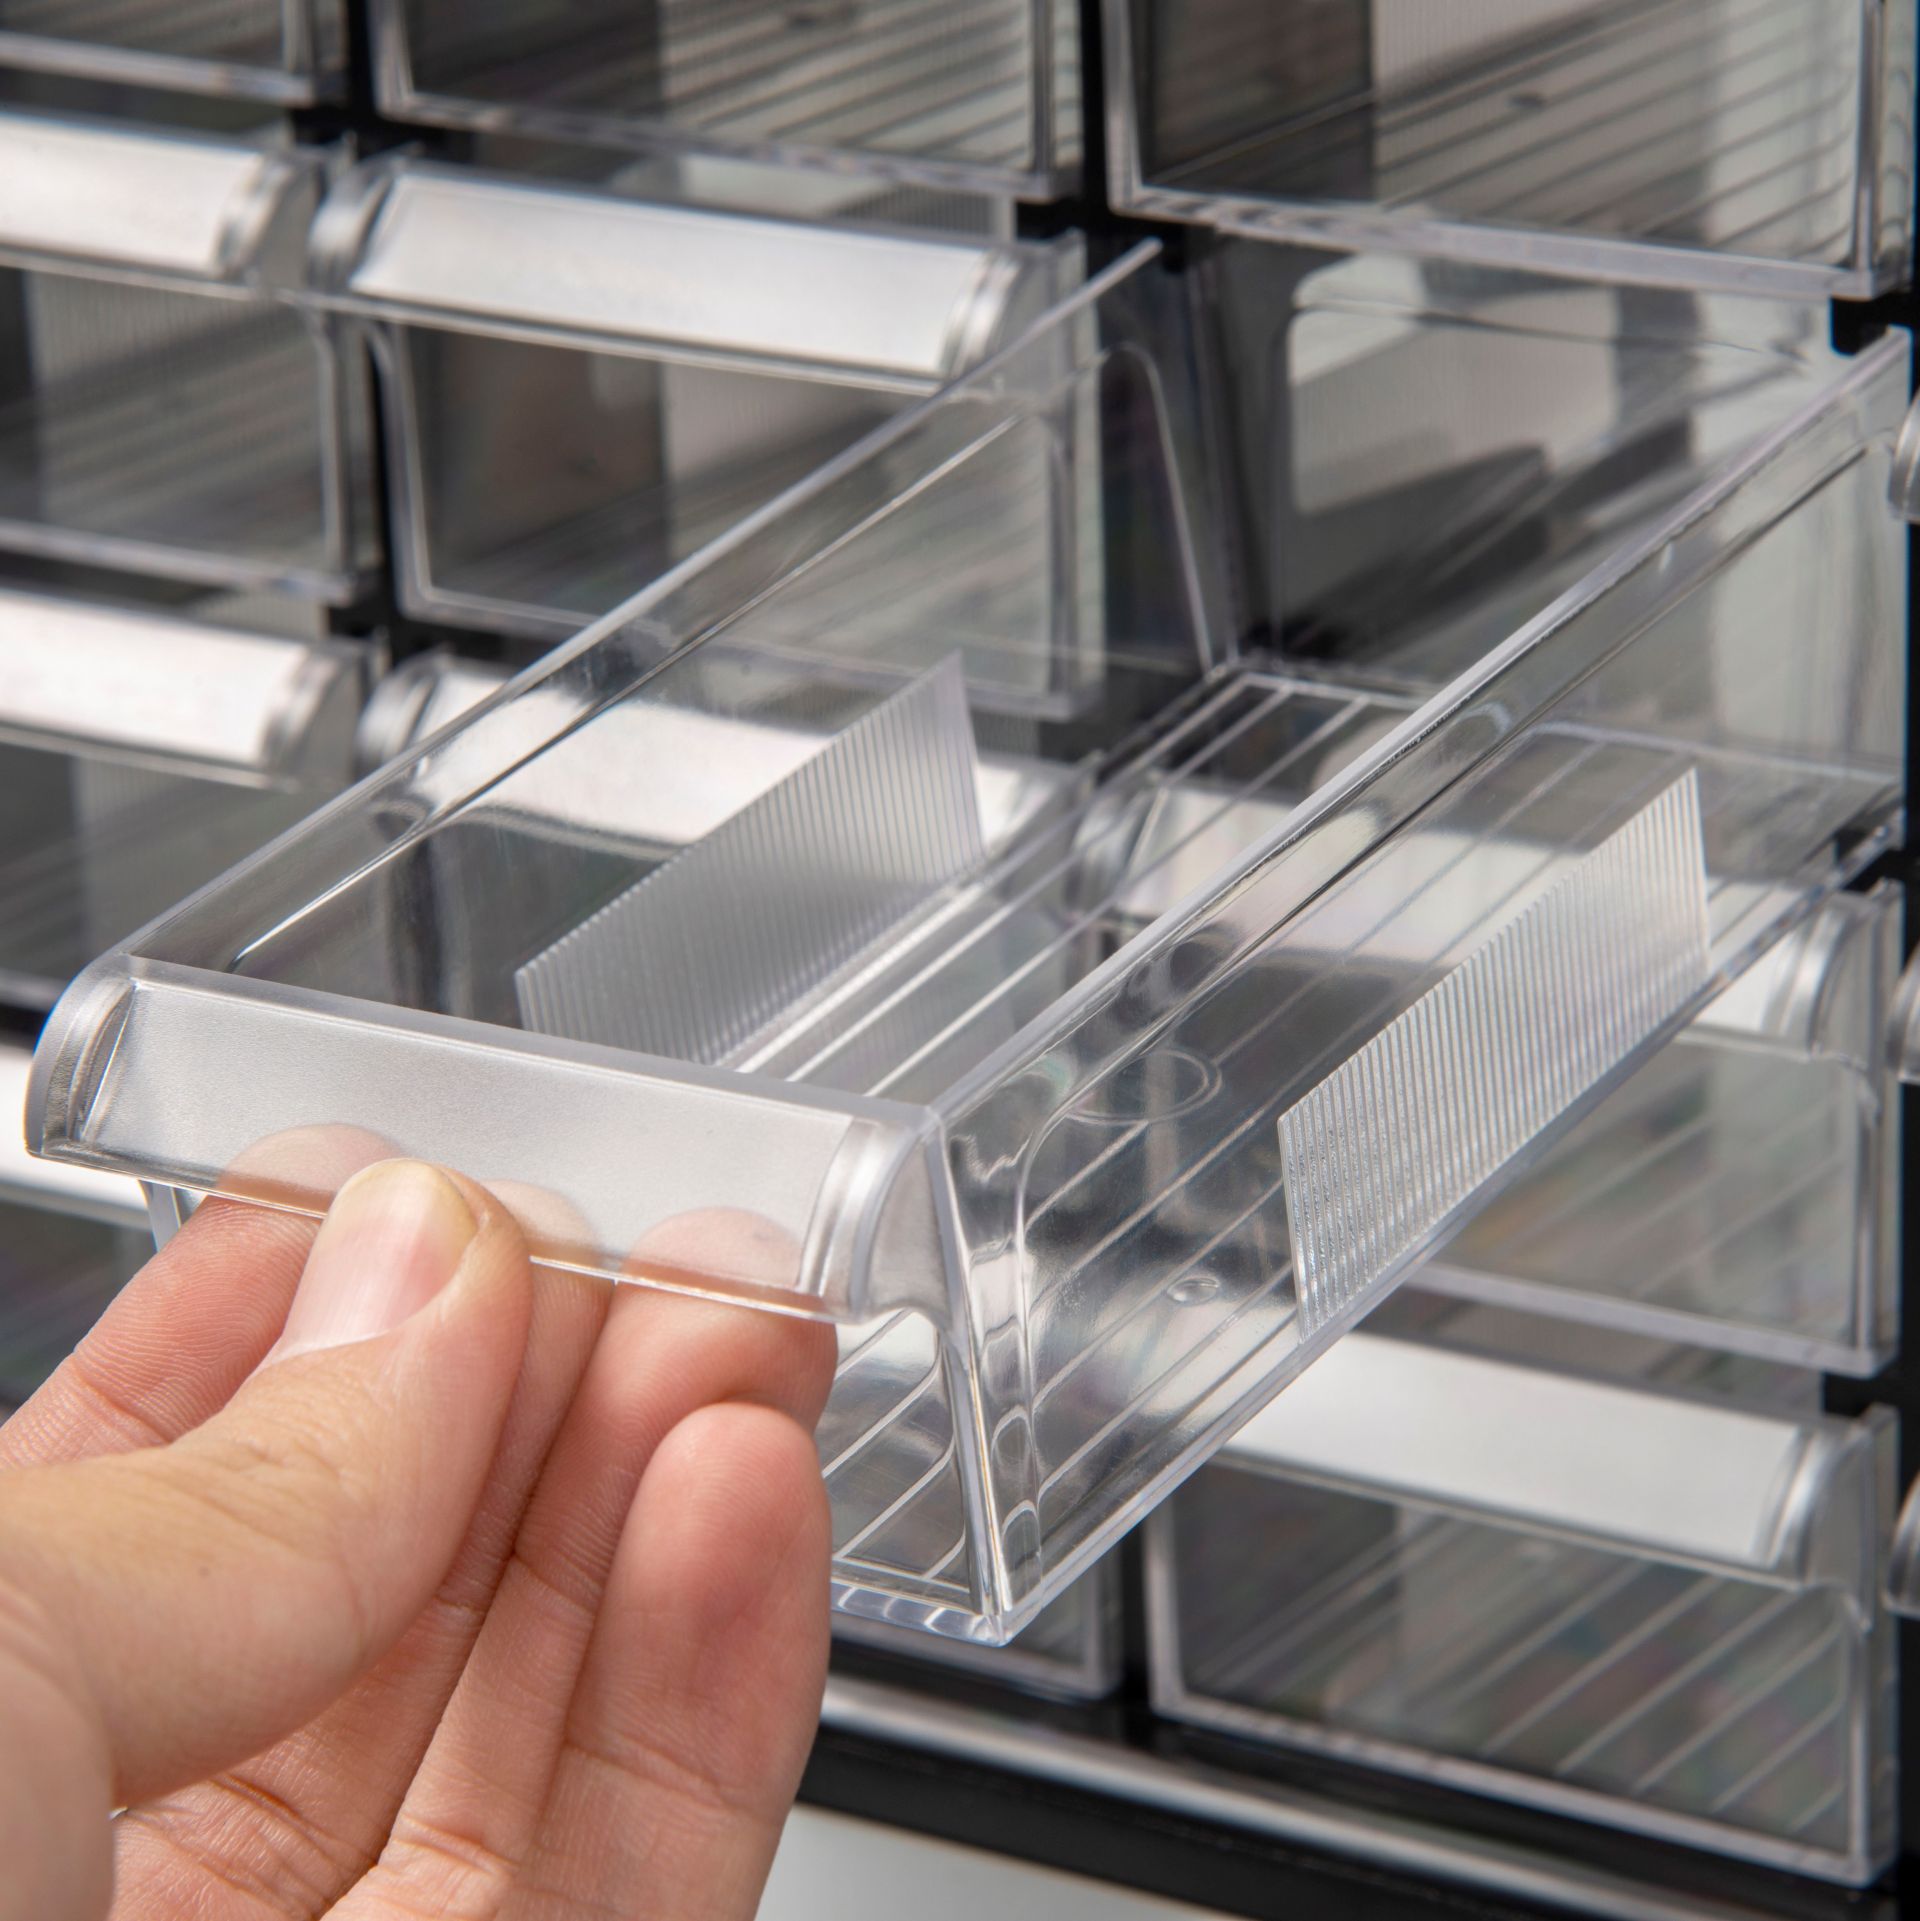 Small Desk Organizer, Stackable Organizer Drawers, Clear Desk